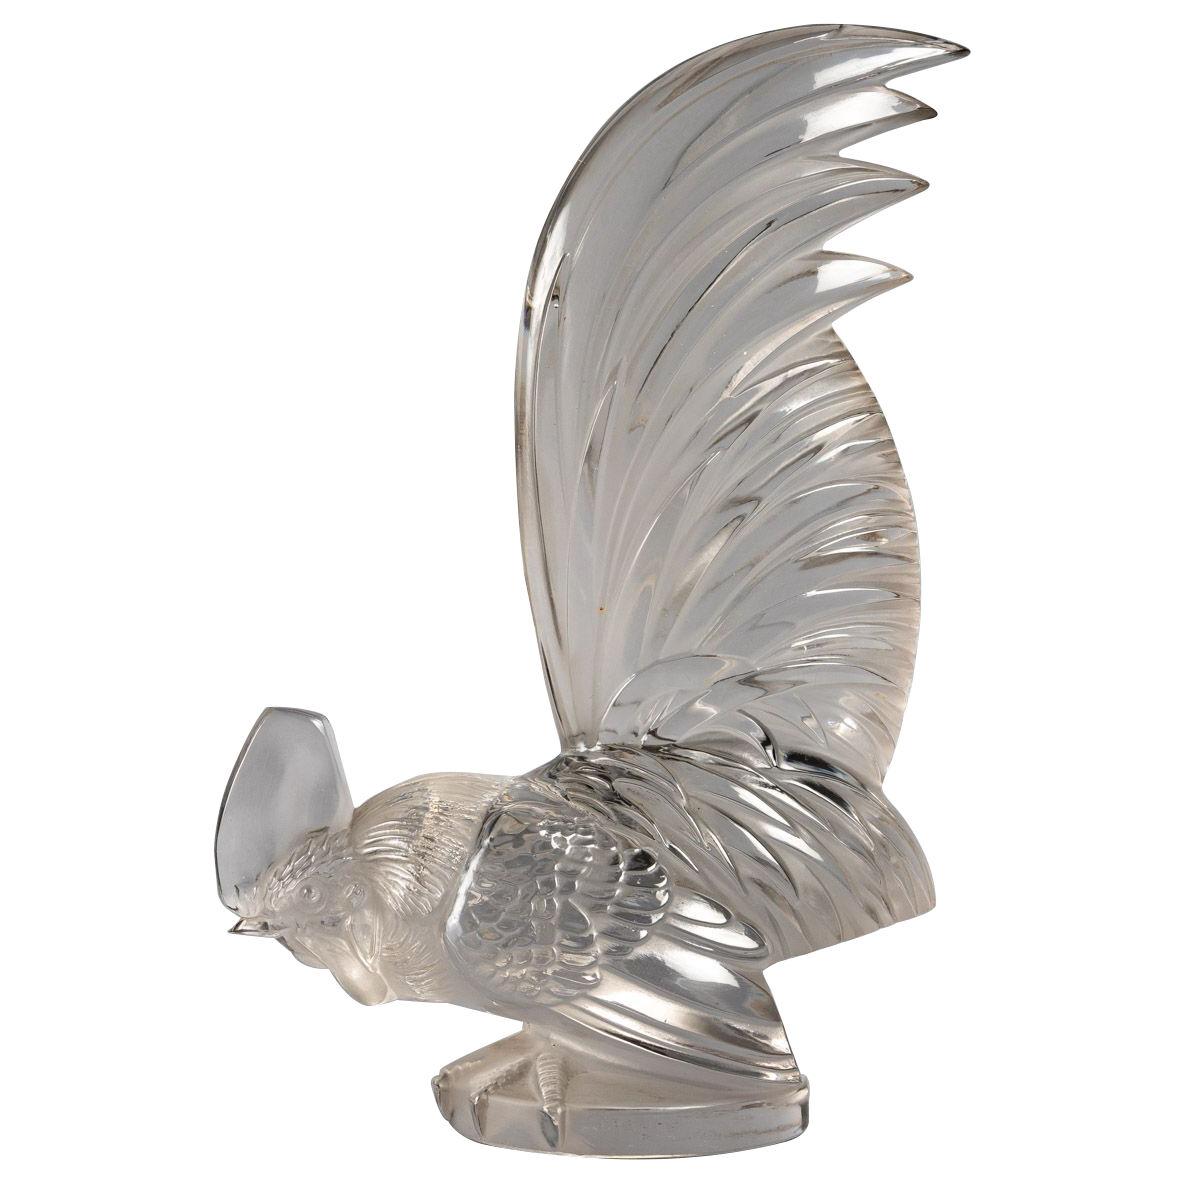 1928 René Lalique - Car Mascot Hood Ornament Coq Nain Frosted Glass - Rooster